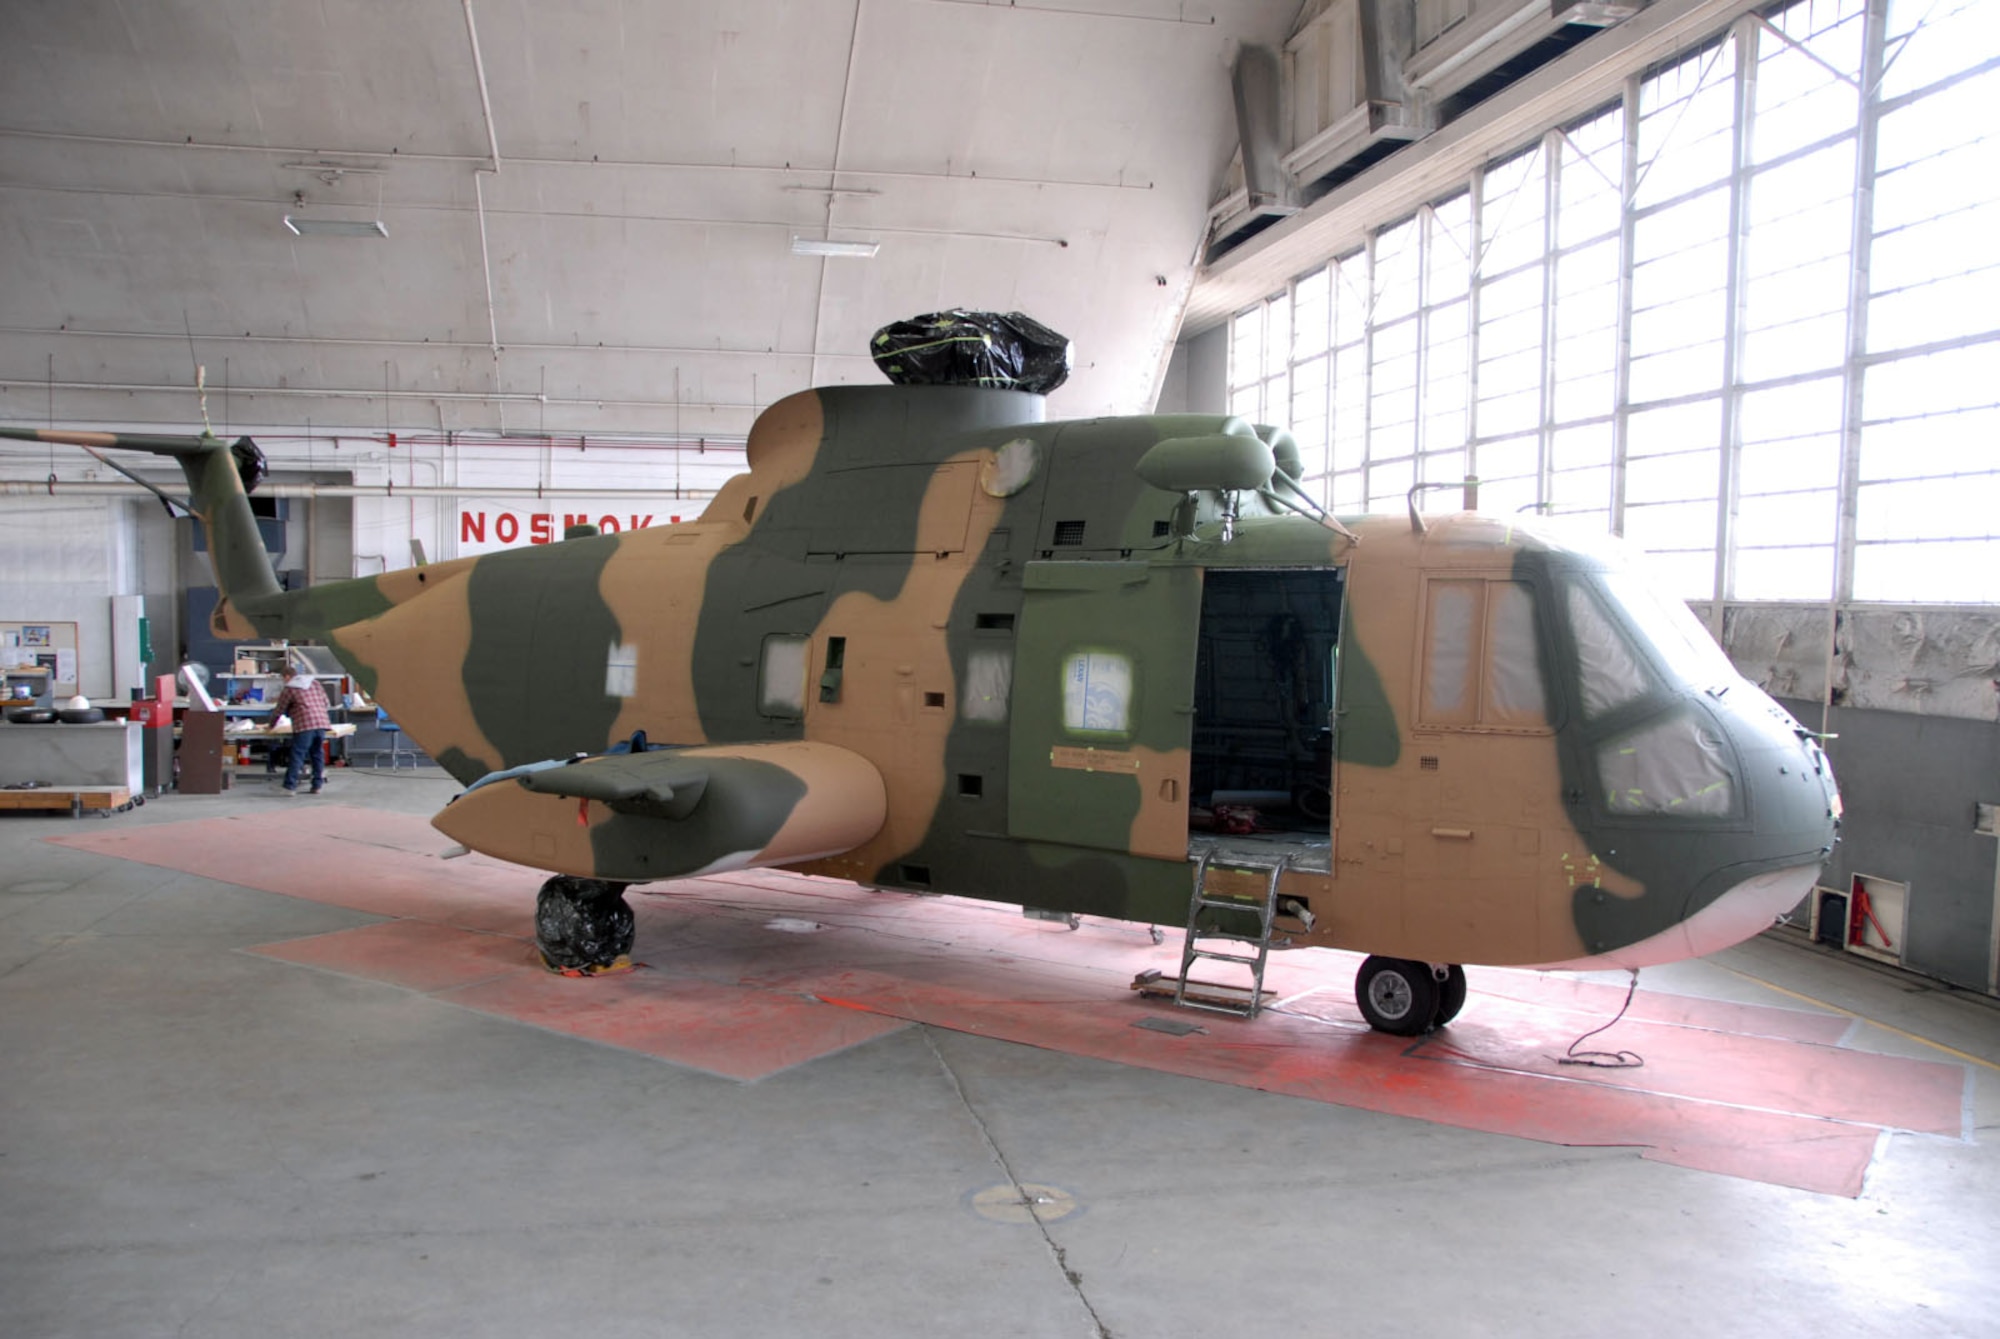 DAYTON, Ohio (11/2010) -- Sikorsky HH-3 in restoration at the National Museum of the U.S. Air Force. (U.S. Air Force photo)